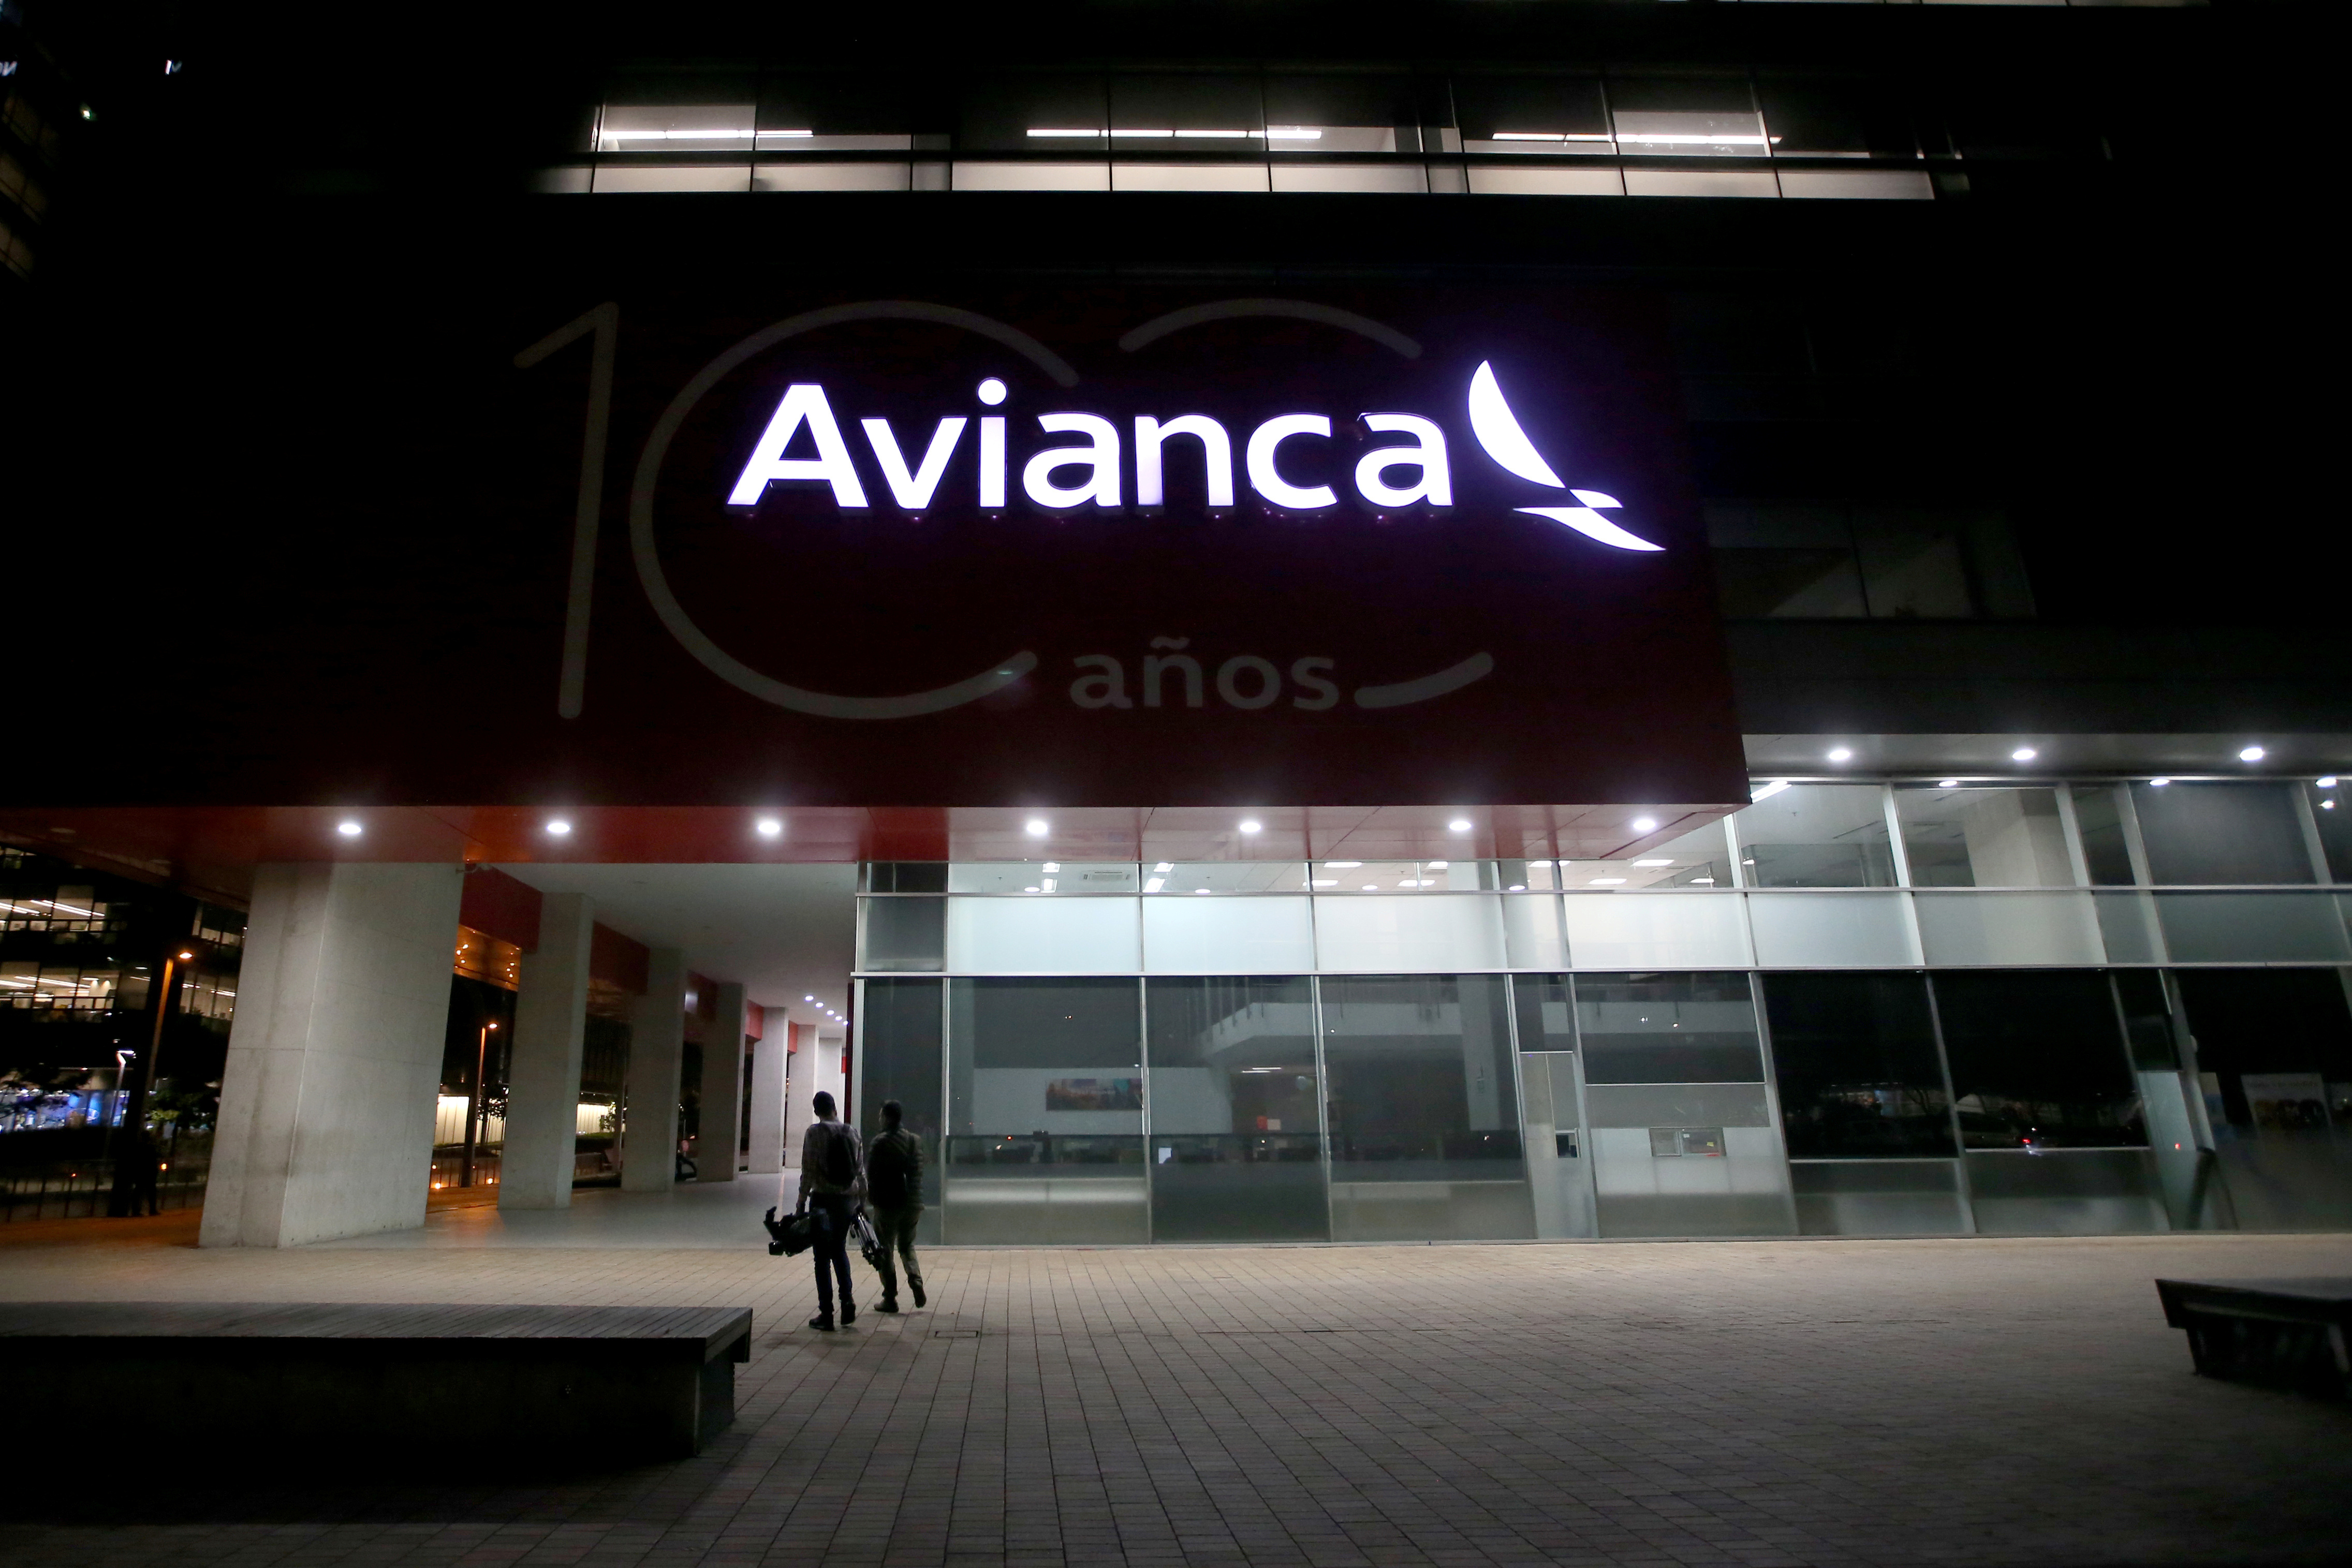 The exterior of the Avianca administrative office is pictured, as officers from Colombia's attorney general's office conduct a raid inside, in Bogota